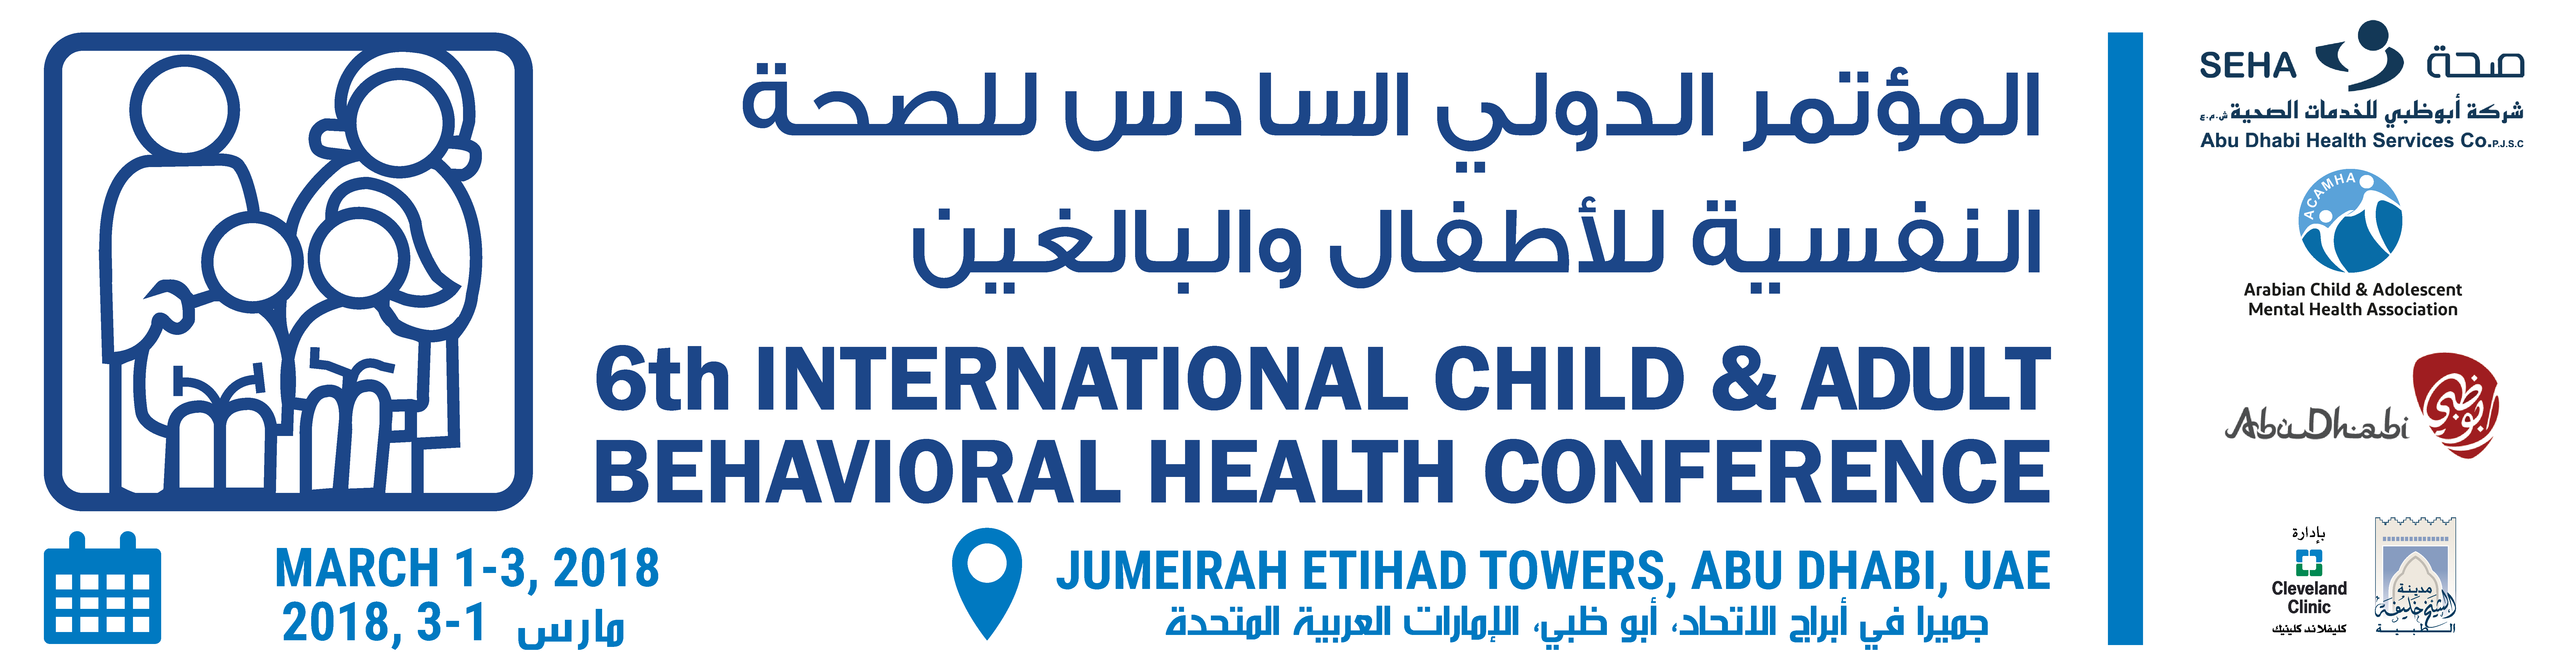 6th International Child and Adult Behavioral Health Conference